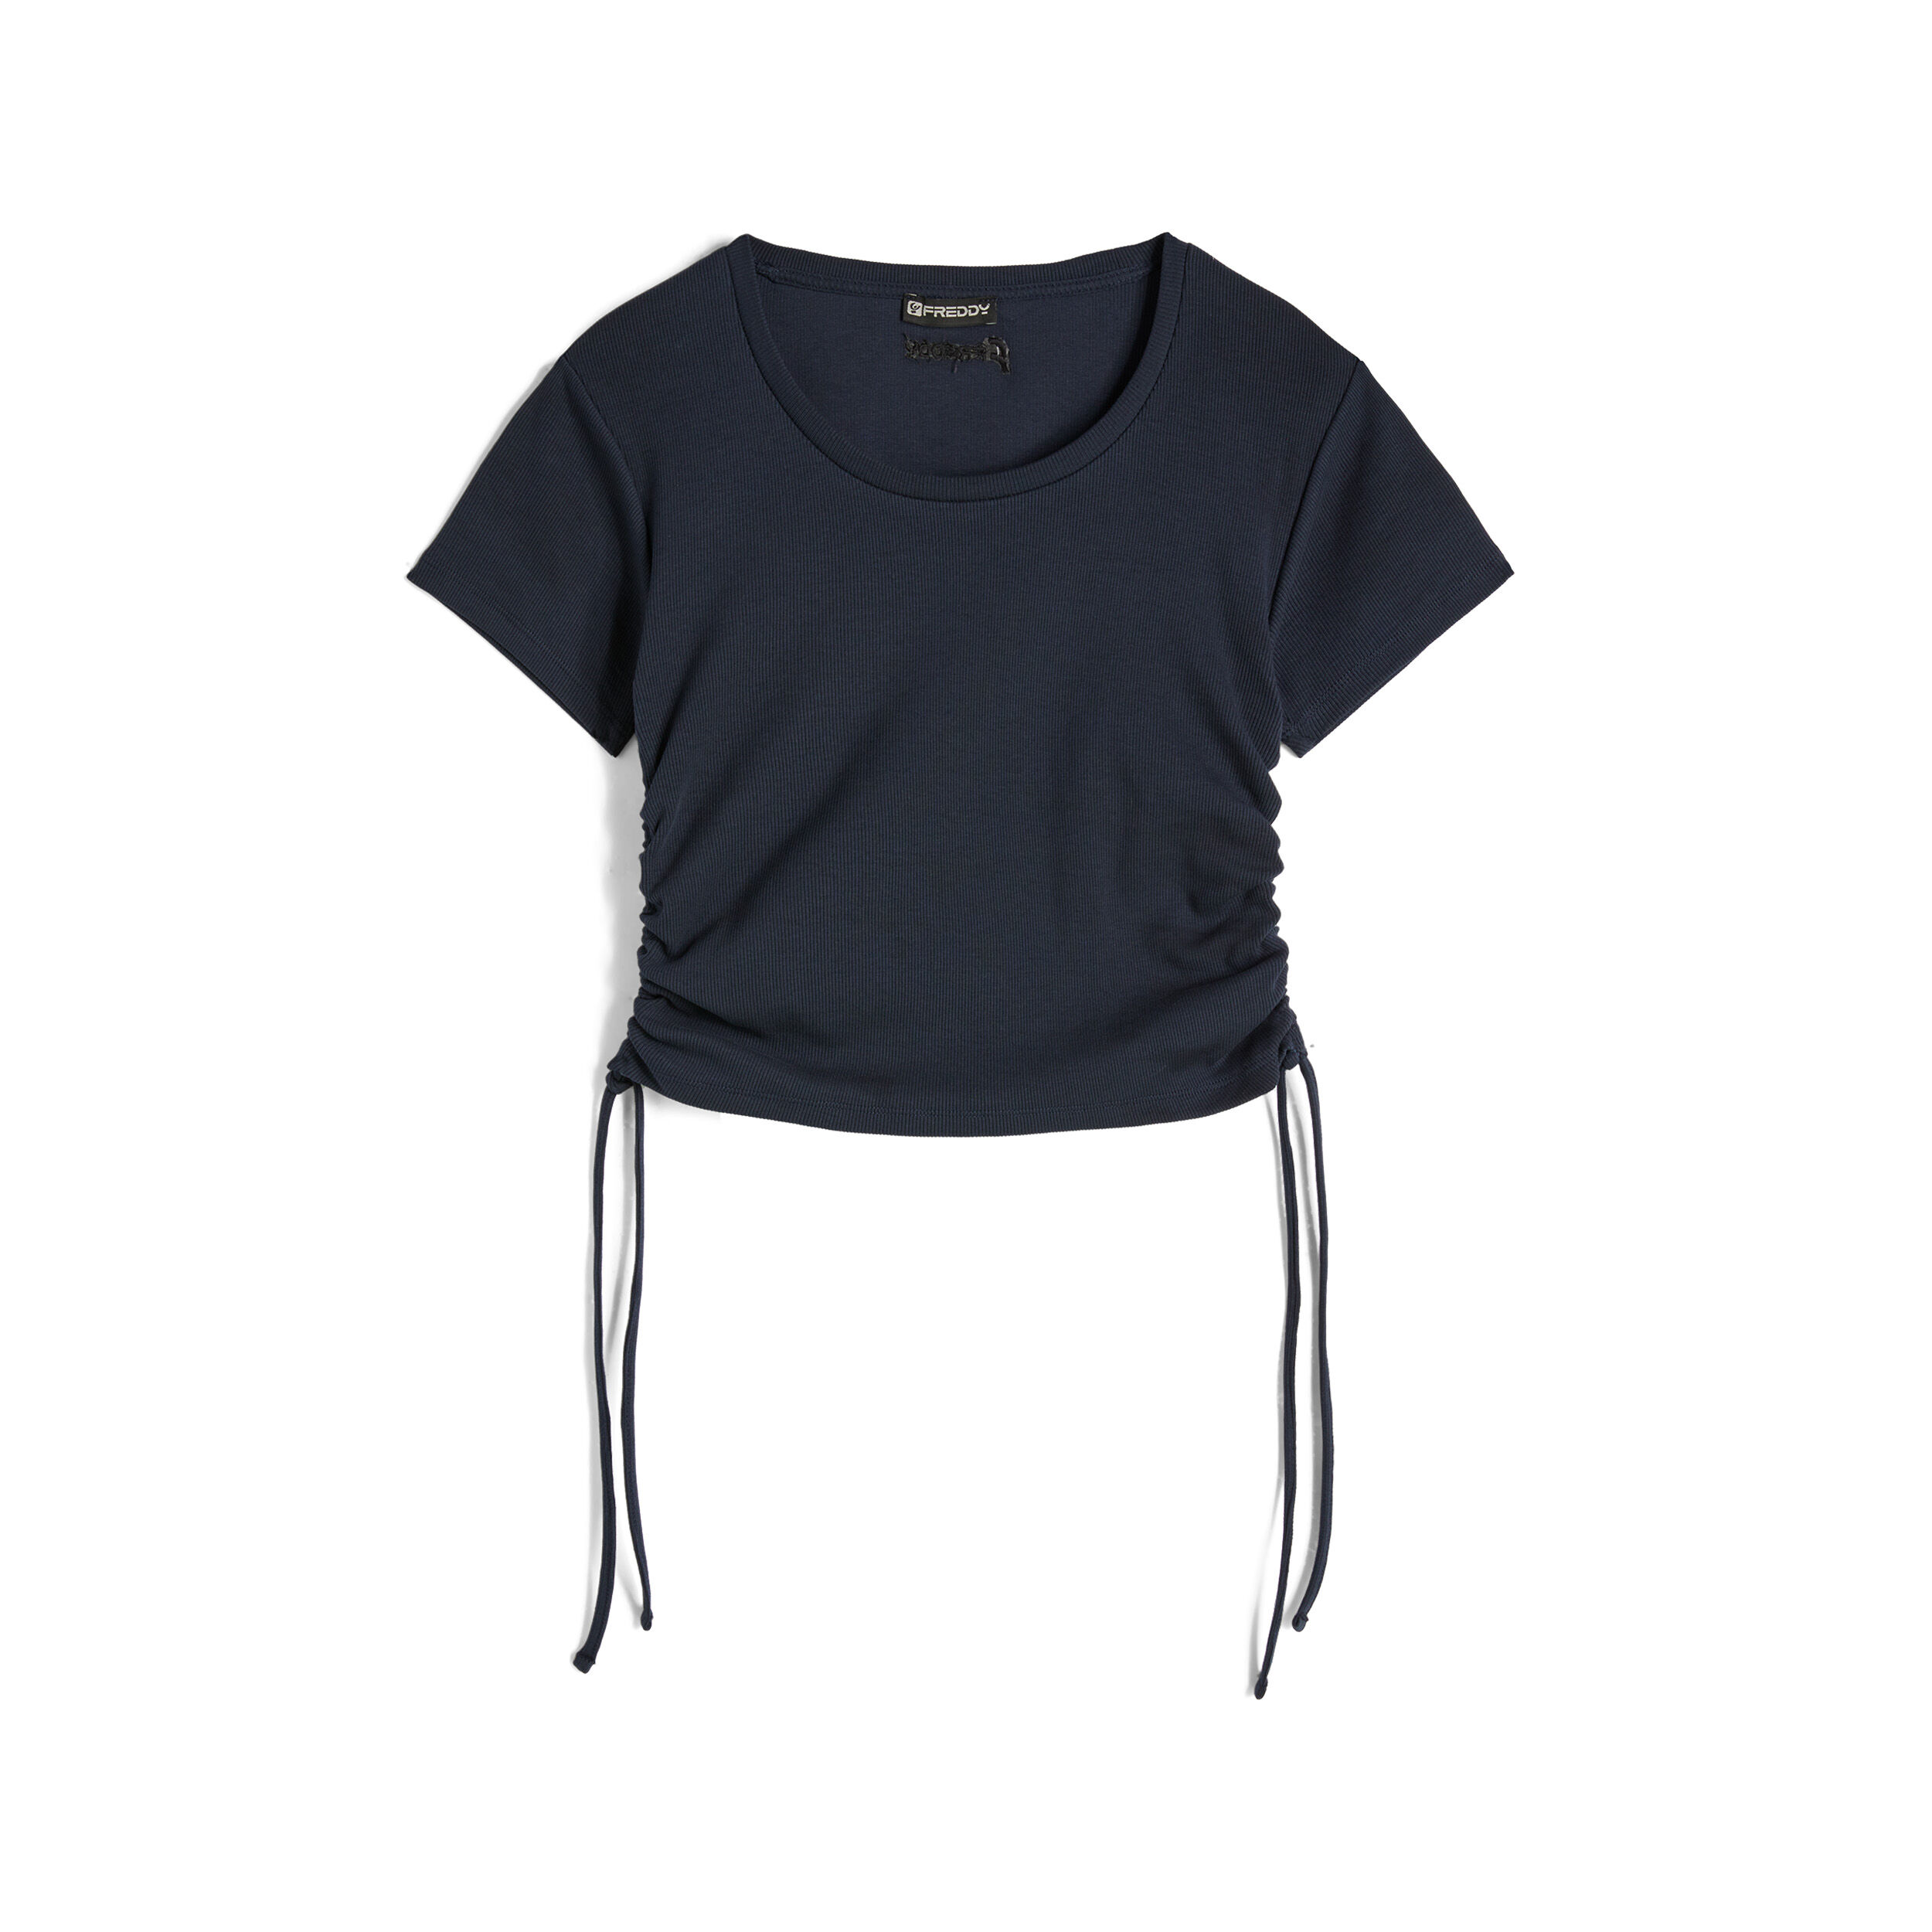 Freddy T-shirt donna slim fit in costina con laccetti sui fianchi Blu Navy Donna Extra Large